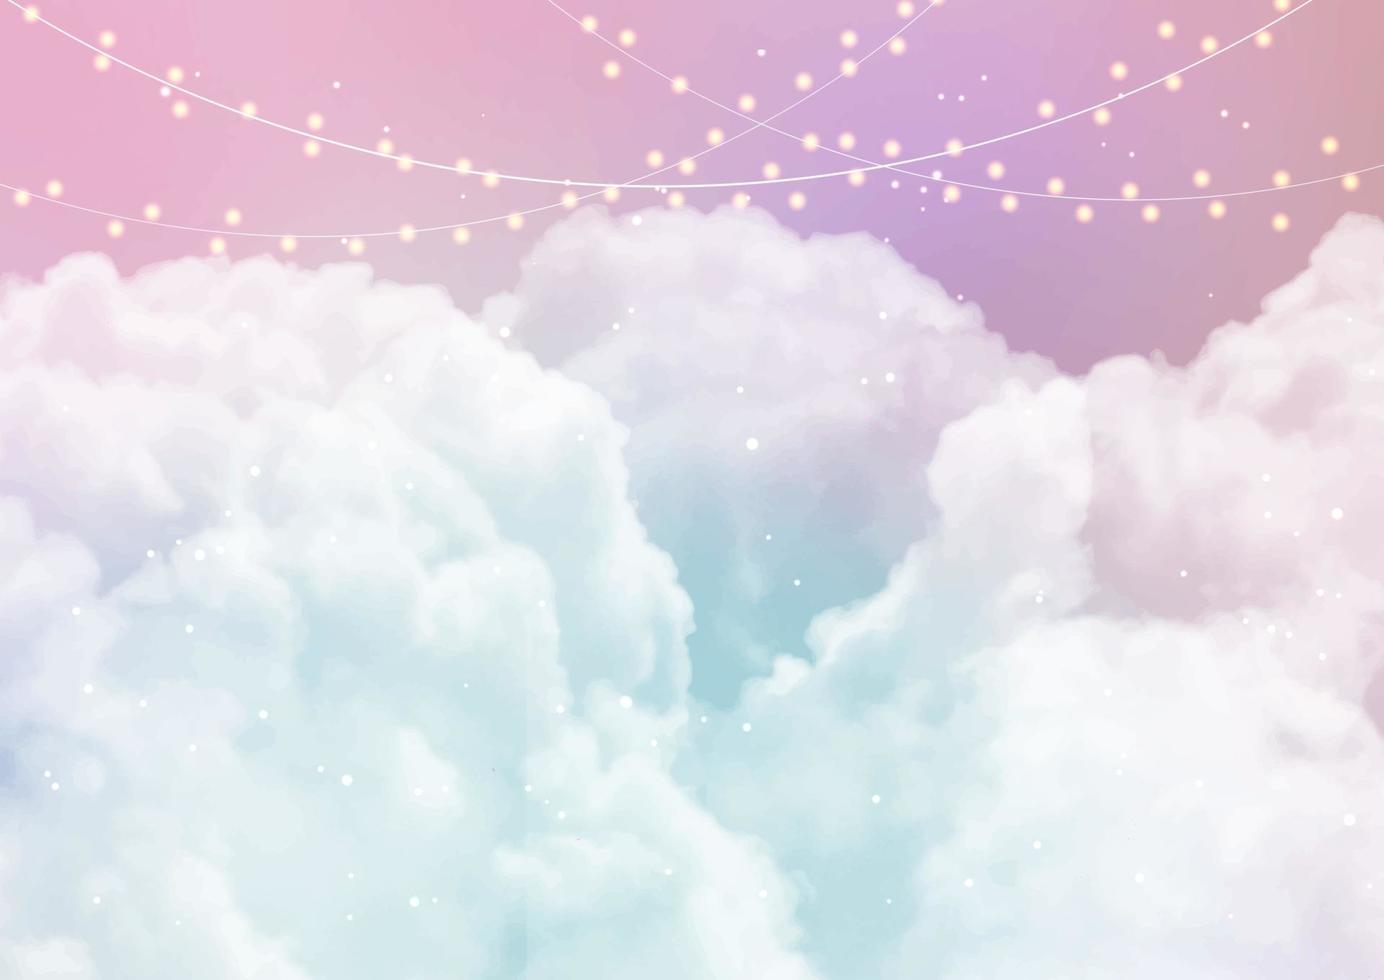 Sky background with sugar cotton candy clouds and stars vector